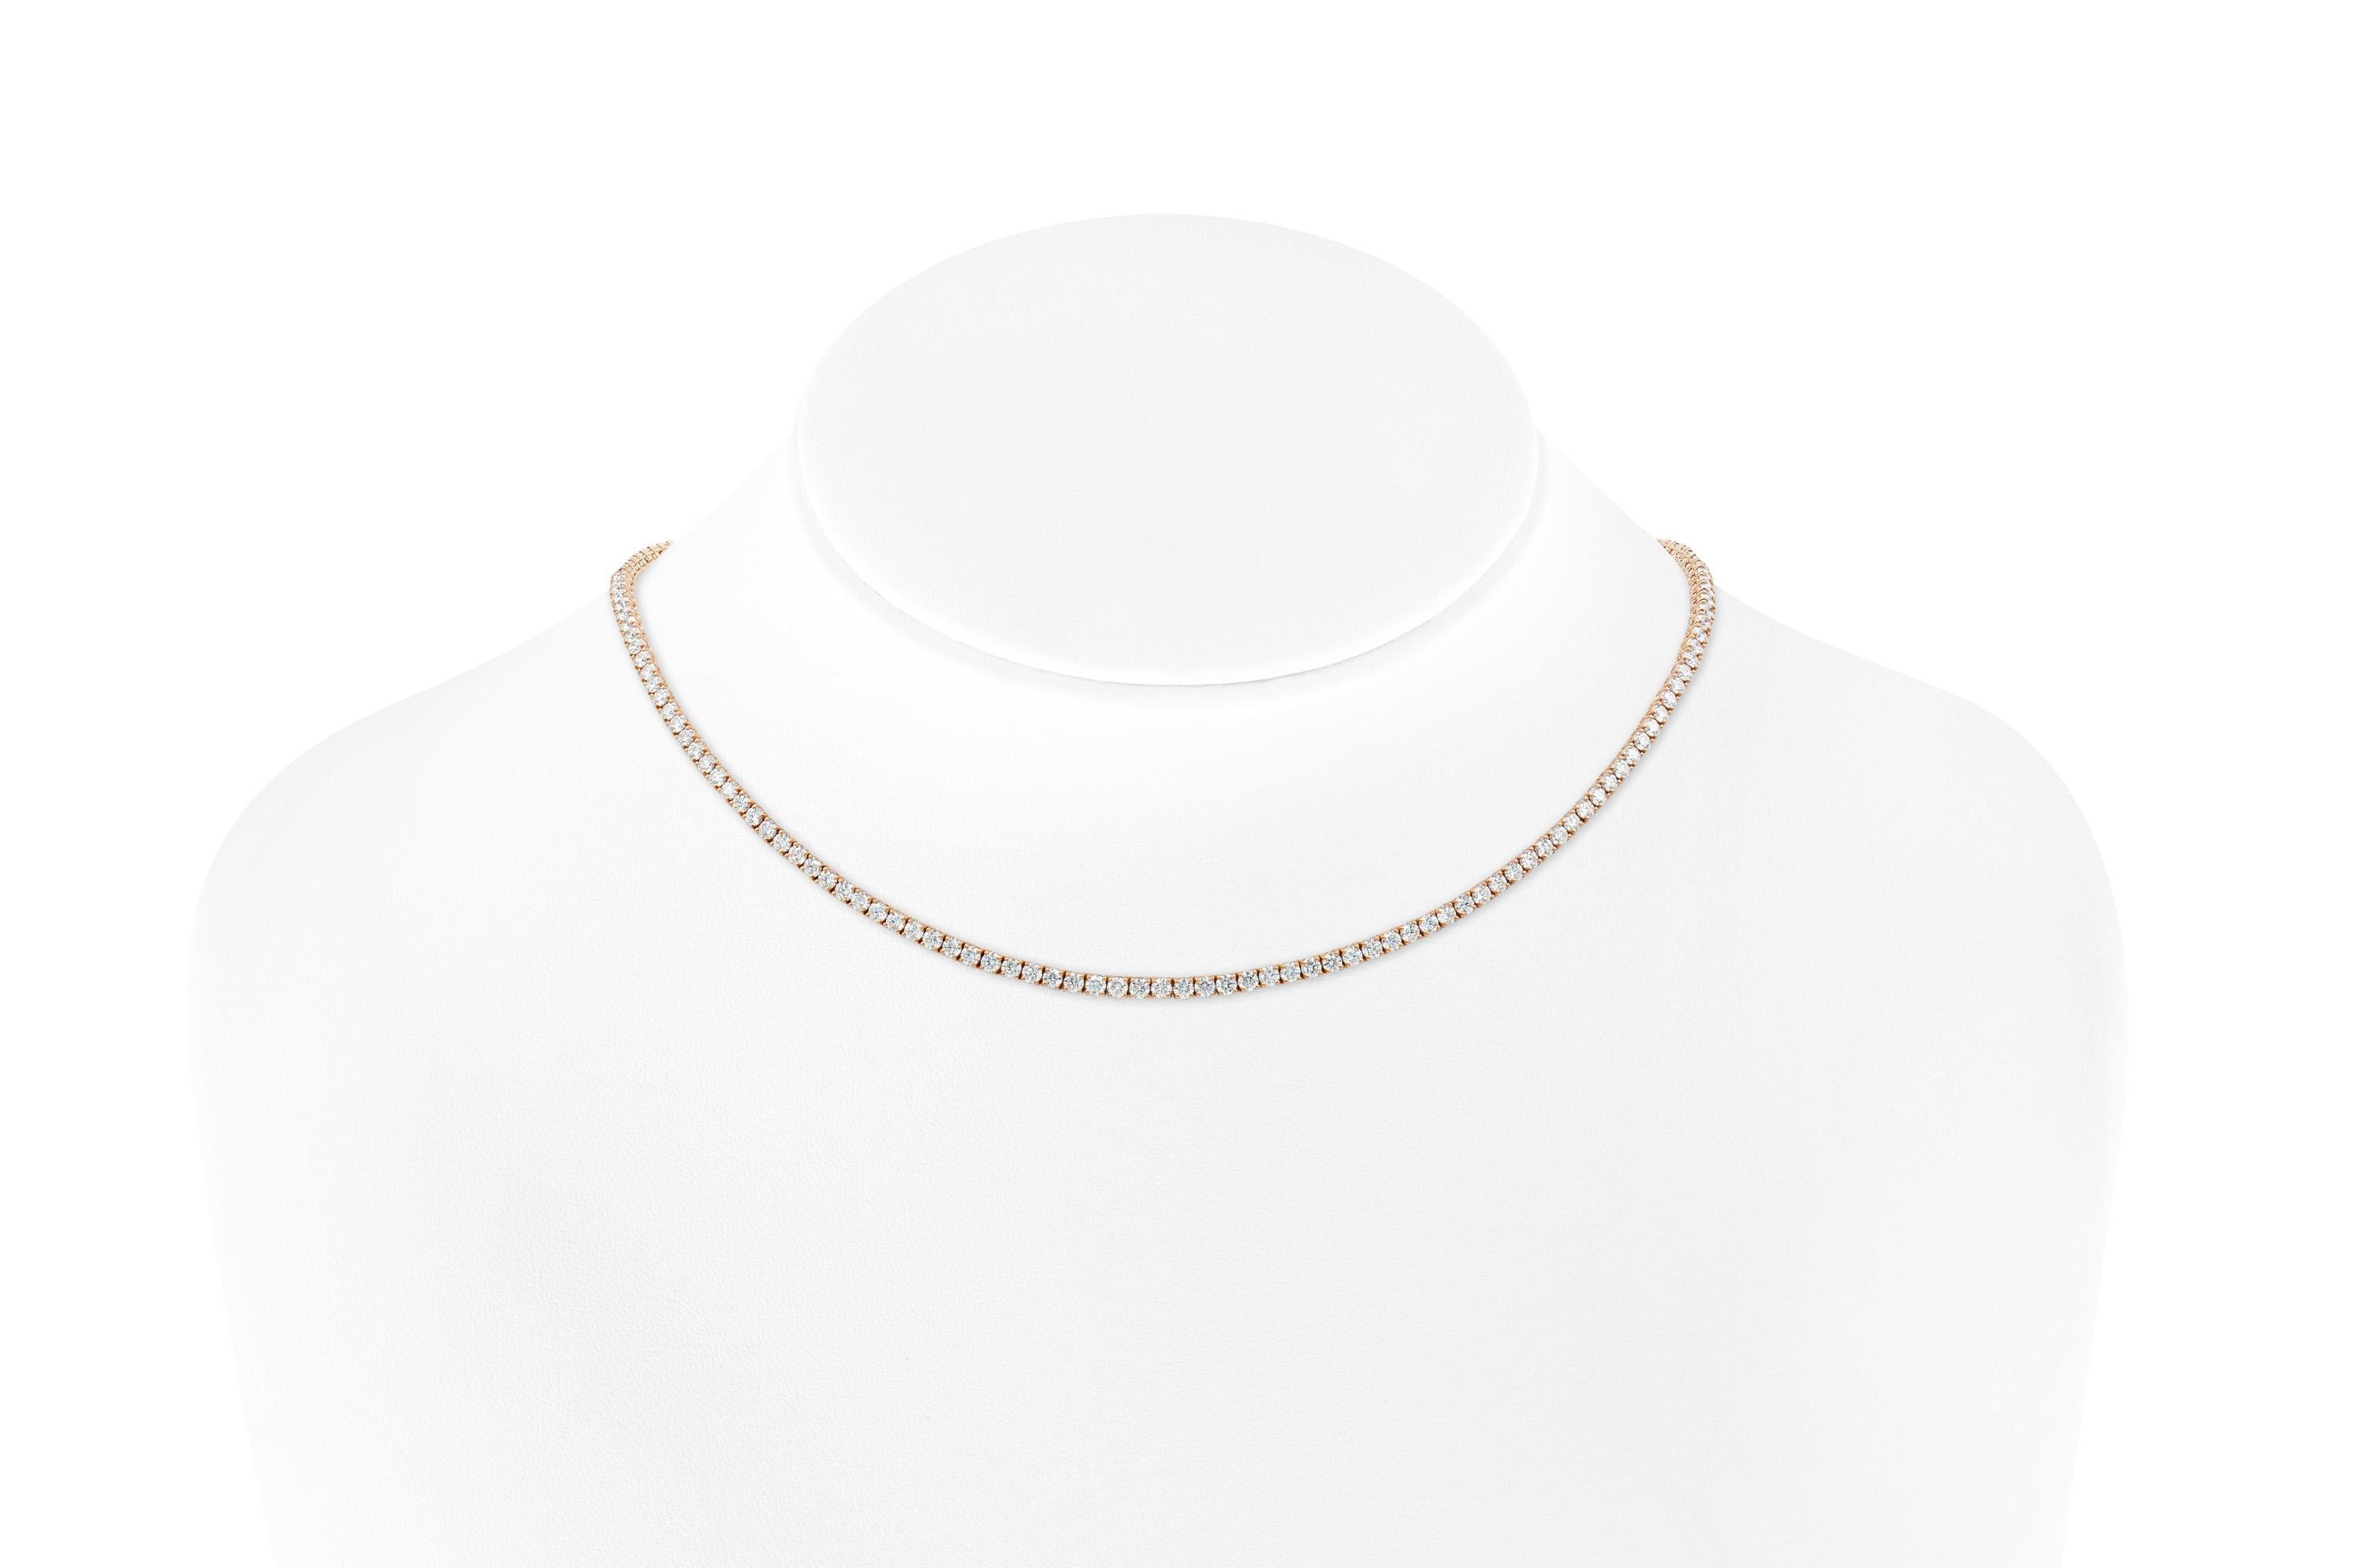 Handmade 18K Rose Gold Classic Tennis Necklace with 169 Round Brilliant Cut Diamonds D color VVS1 clarity, weighting in total of 5.20 carats, This stunning piece is 16.00 inches long. 


Viewings available in our NYC wholesale office by appointment